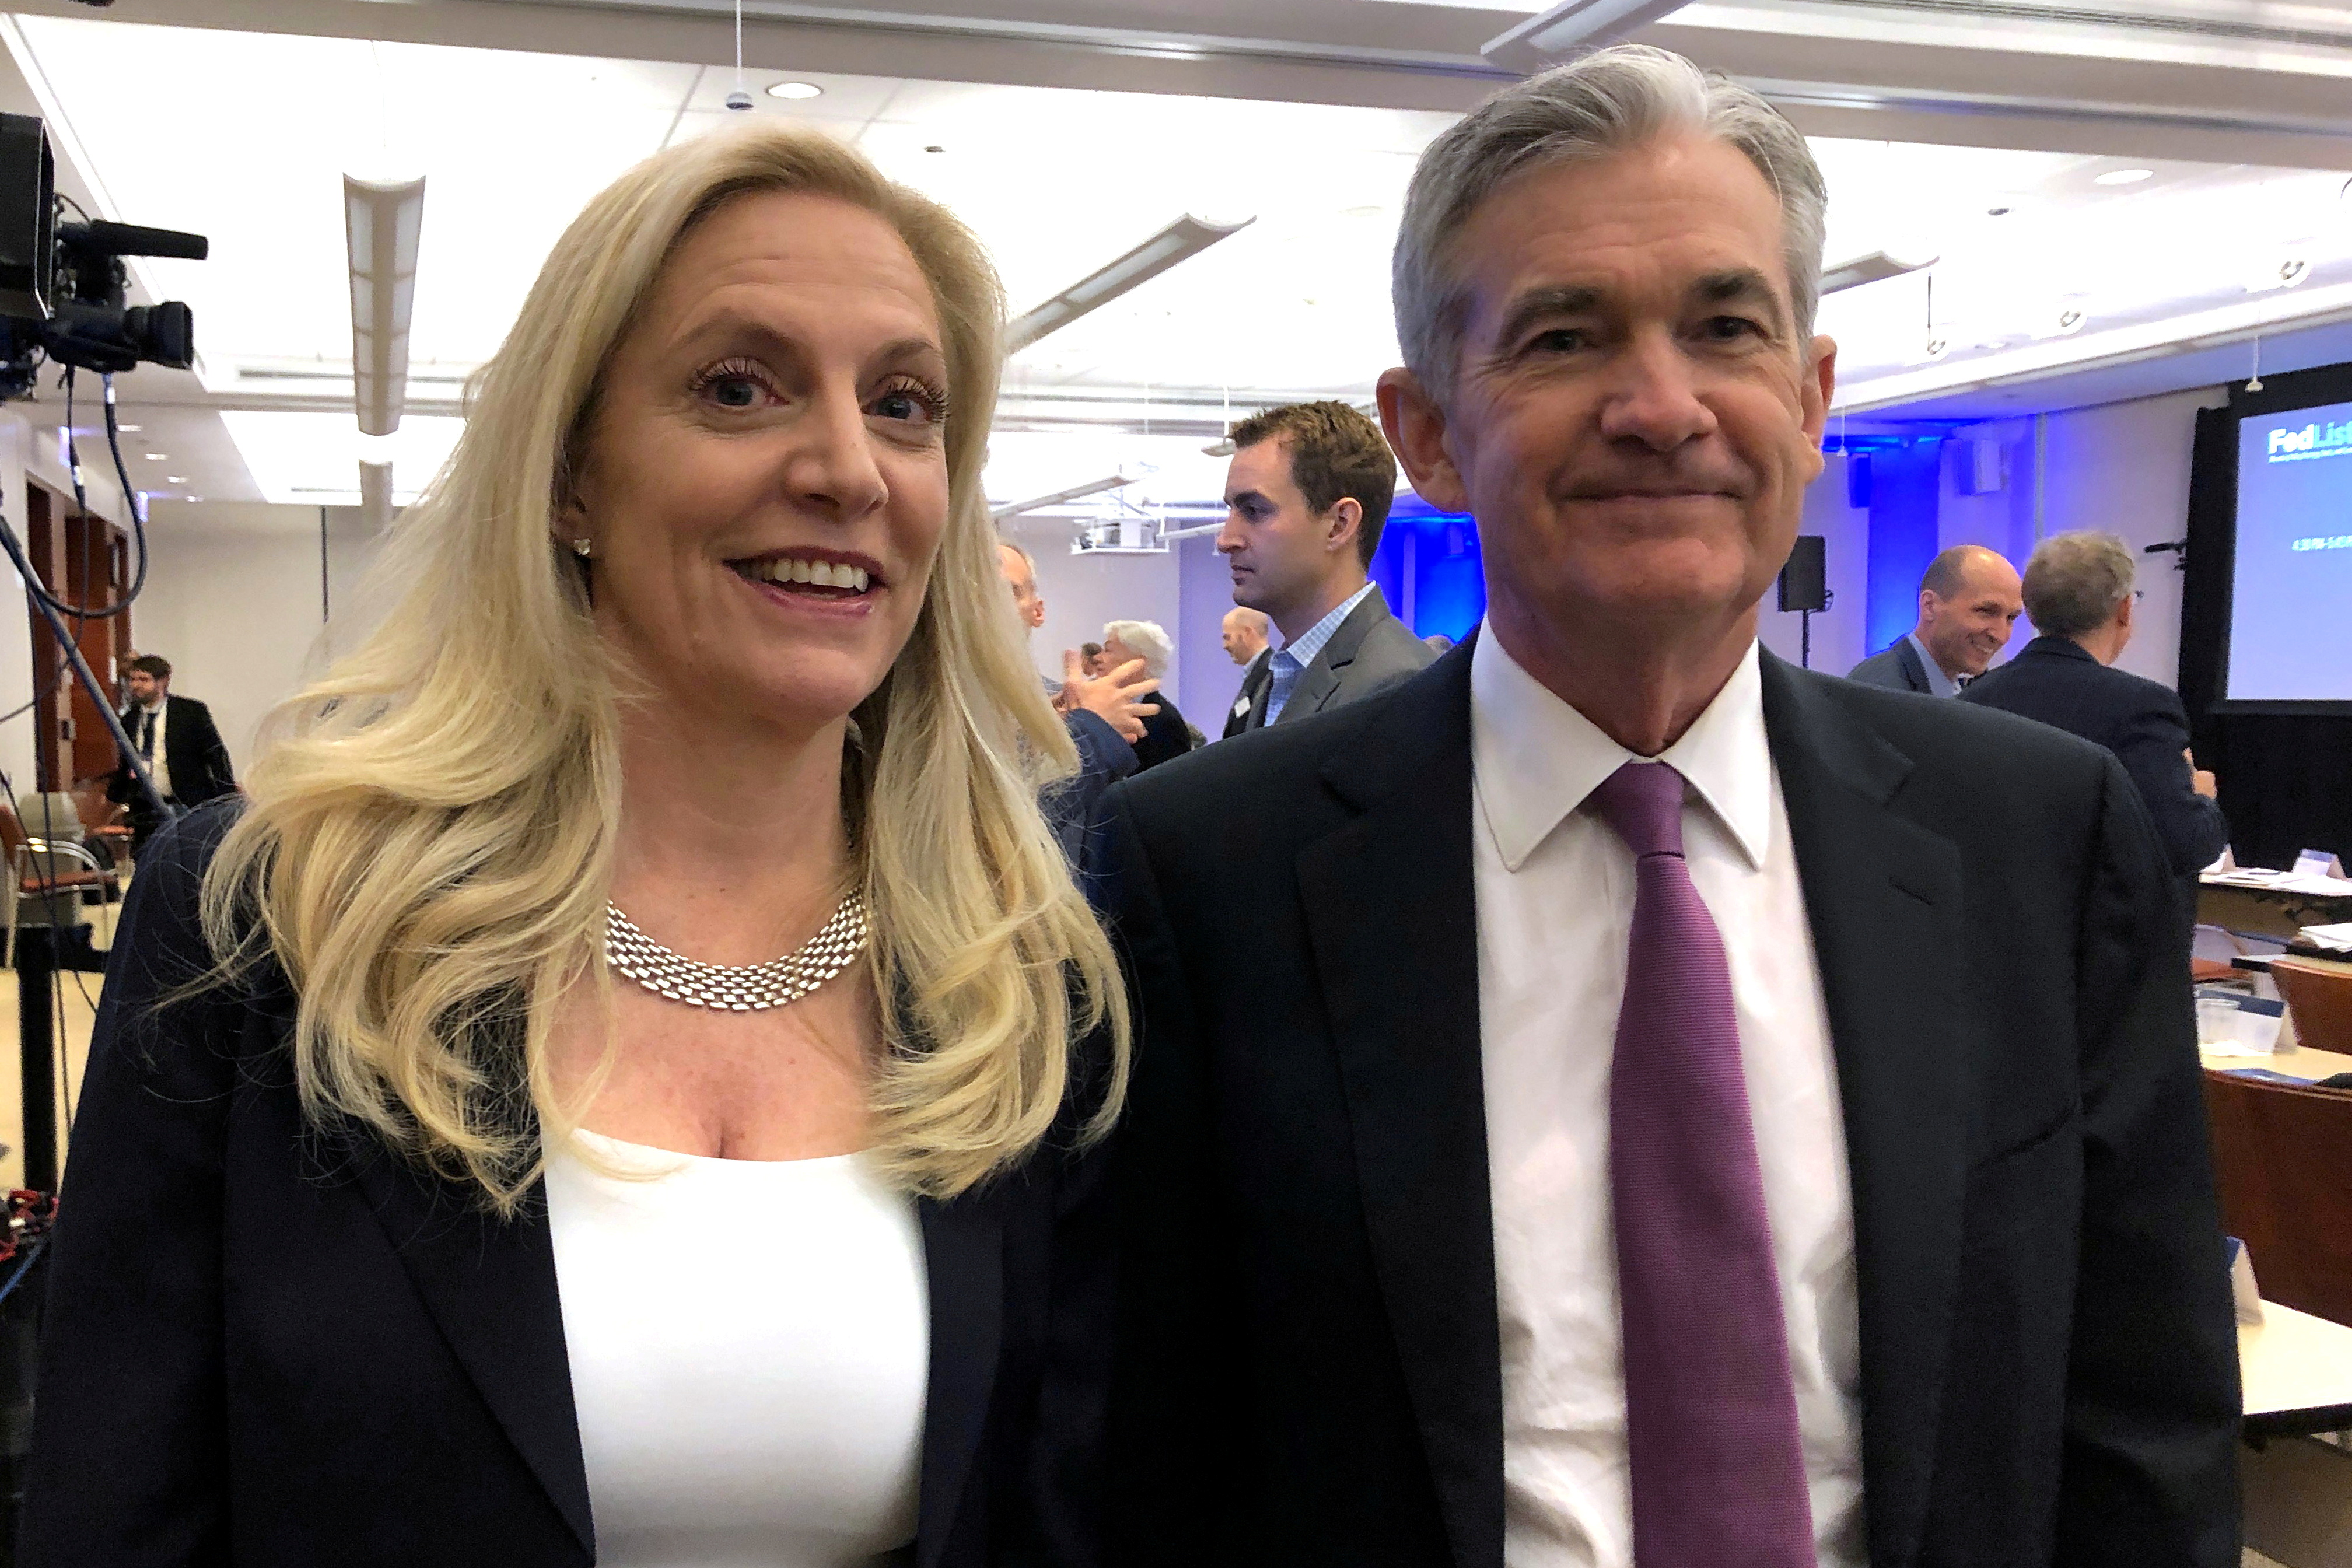 Federal Reserve Chair Jerome Powell poses for photos with Fed Governor Lael Brainard at the Federal Reserve Bank of Chicago